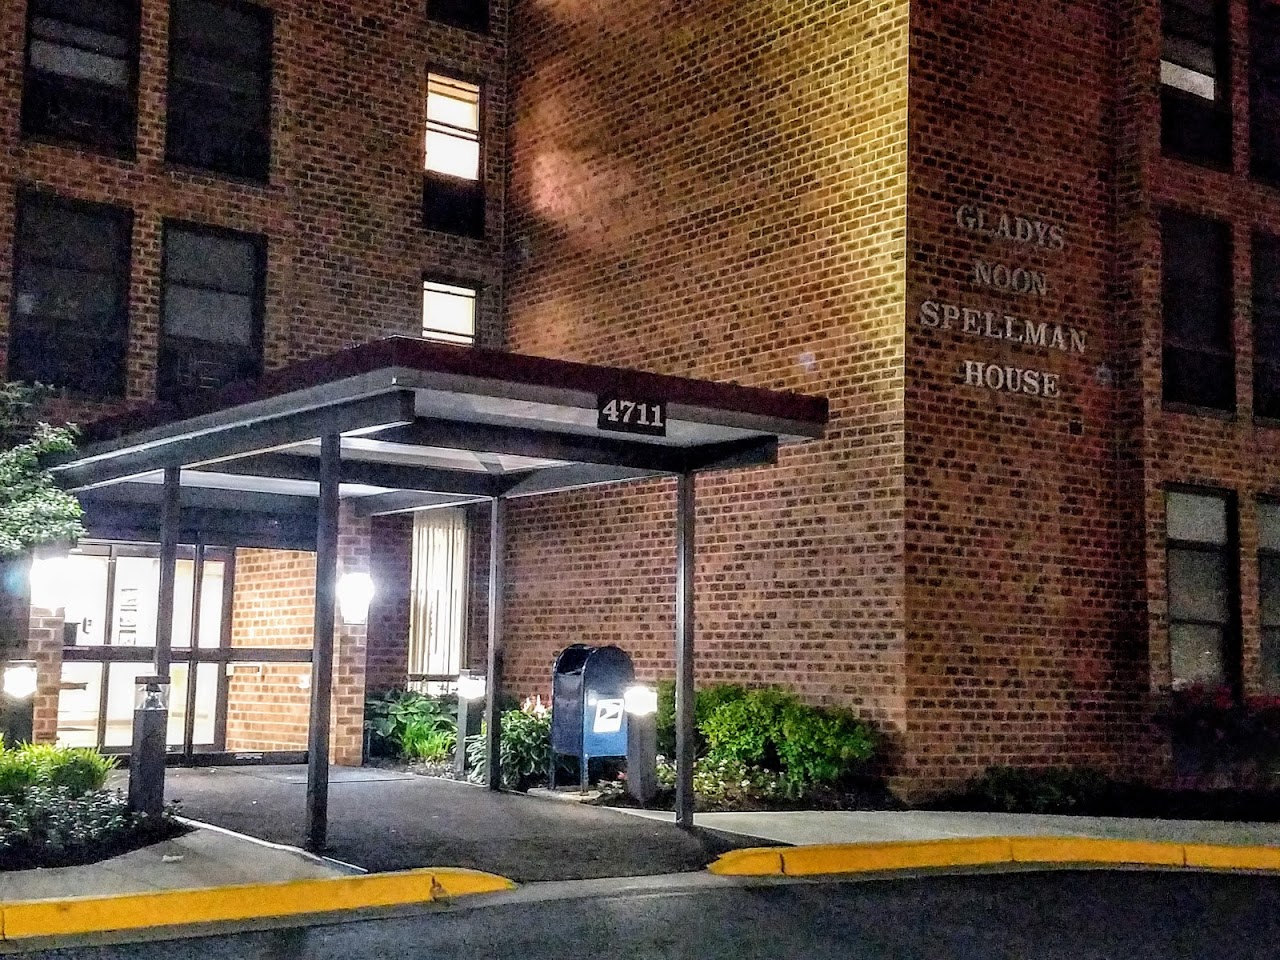 Photo of SPELLMAN HOUSE APTS. Affordable housing located at 4711 BERWYN HOUSE RD COLLEGE PARK, MD 20740